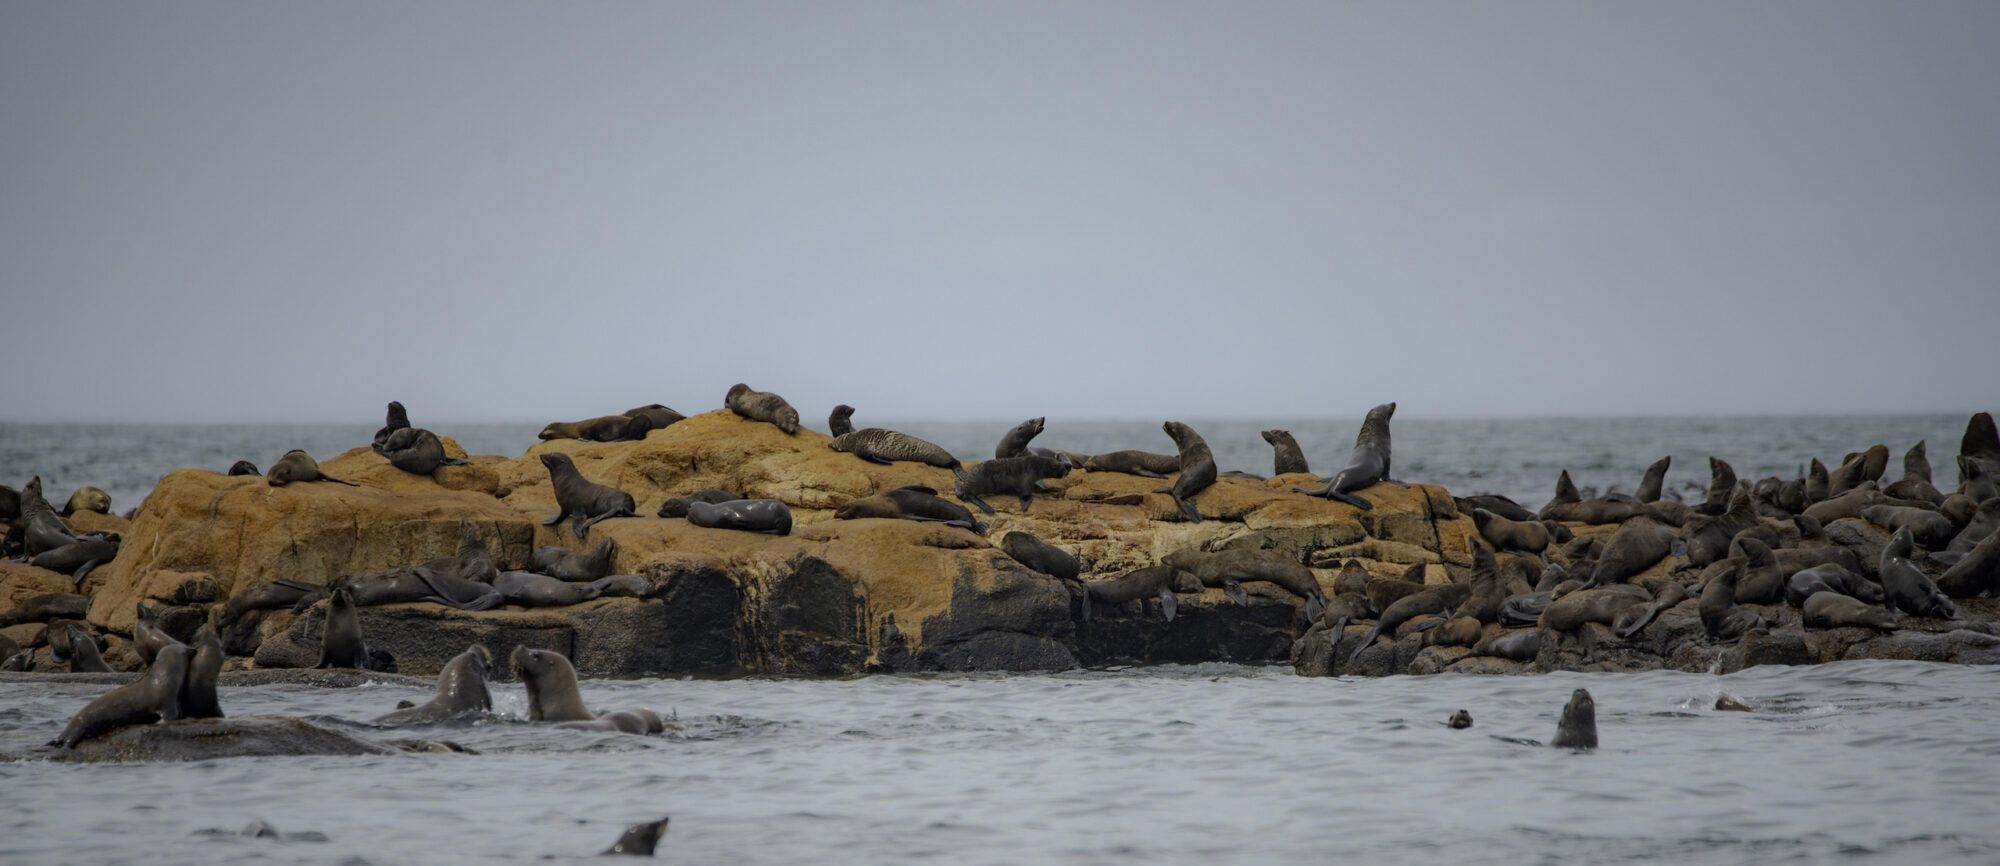 Colony of sea lions and fur seals at Isla de Lobos, home to one of the largest permanent colonies of these species on the continent 